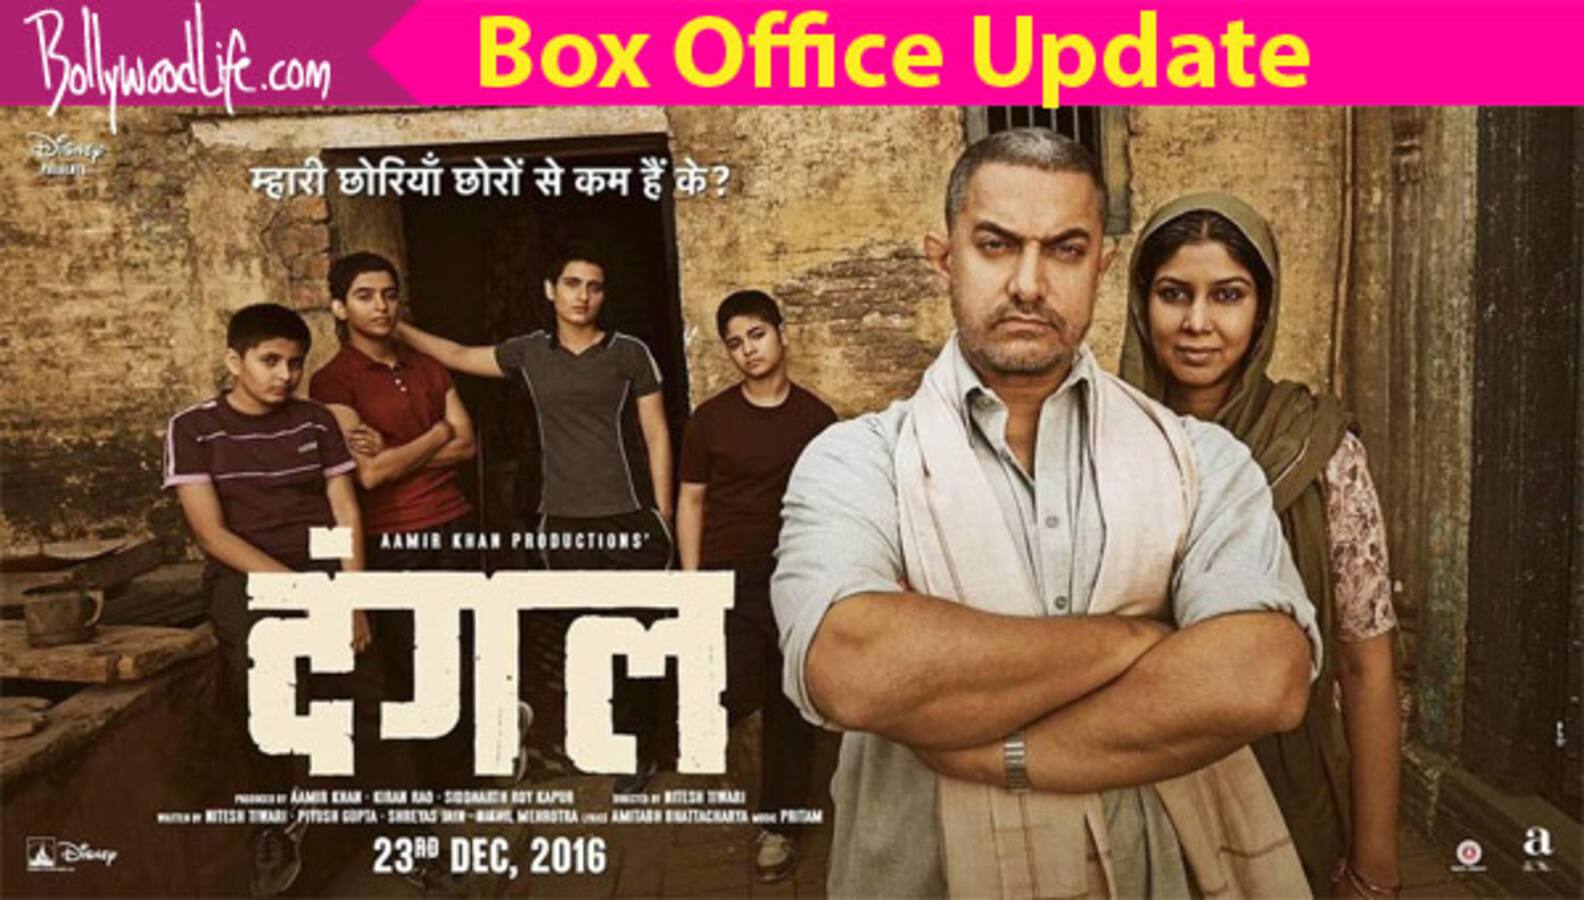 Dangal box office collection day 14: Aamir Khan's wrestling drama earns Rs 313 crore, all set to beat Bajrangi Bhaijaan